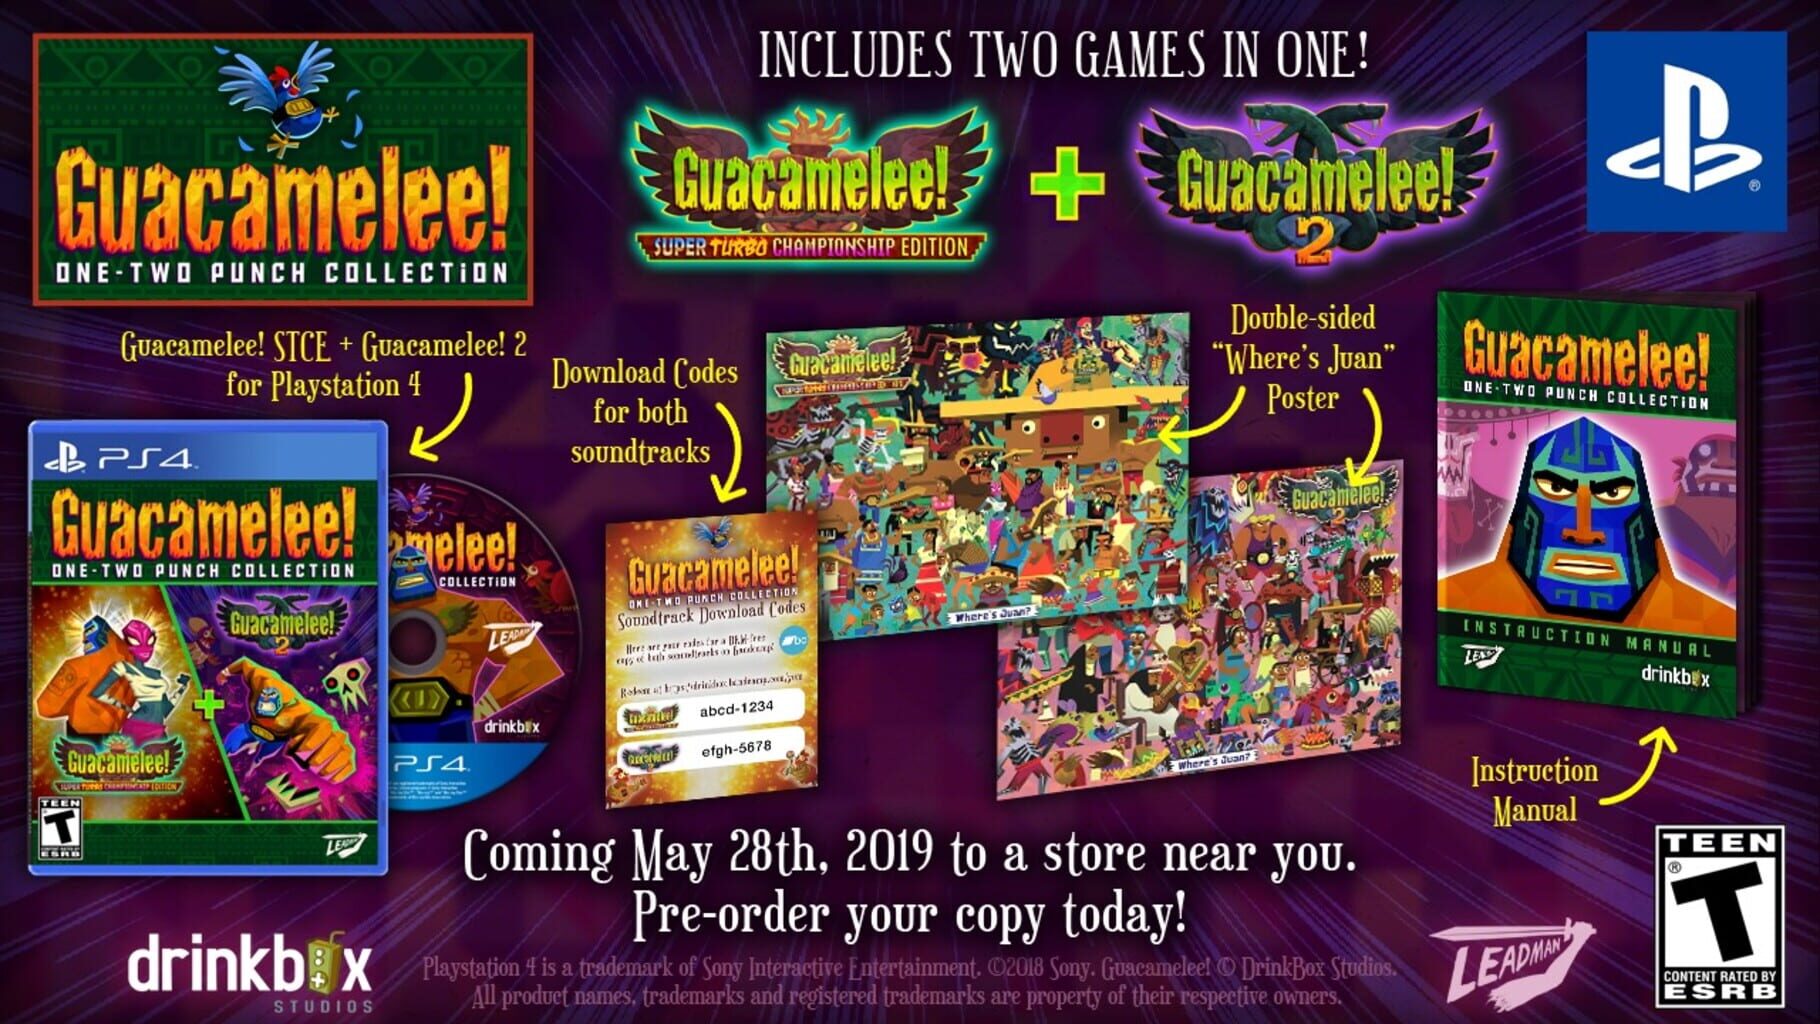 Guacamelee! One-Two Punch Collection screenshot